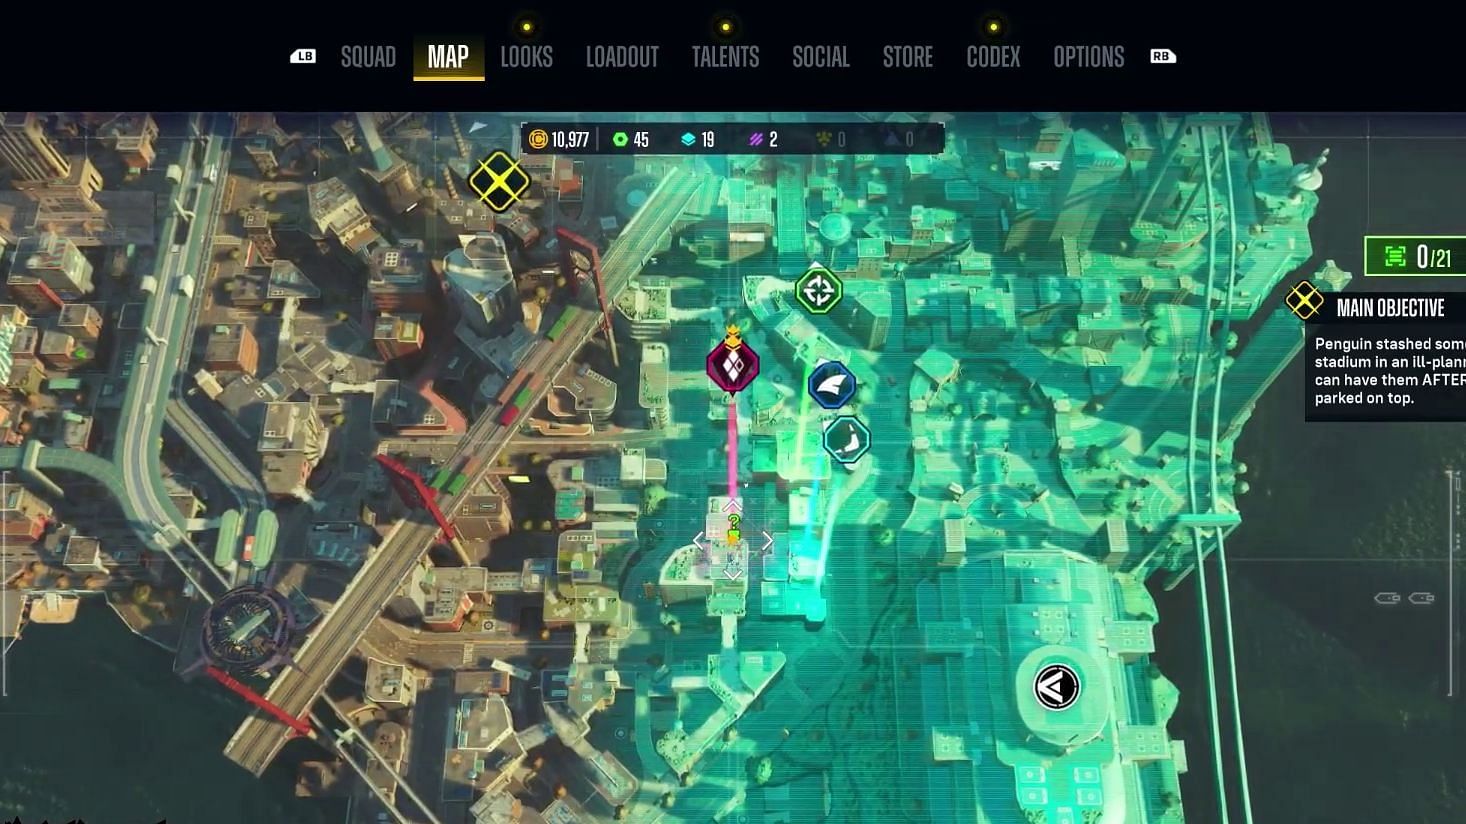 Spot #2 of Suicide Squad Kill the Justice League Riddler Trophy Locations (Image via YouTube/Pixelz)